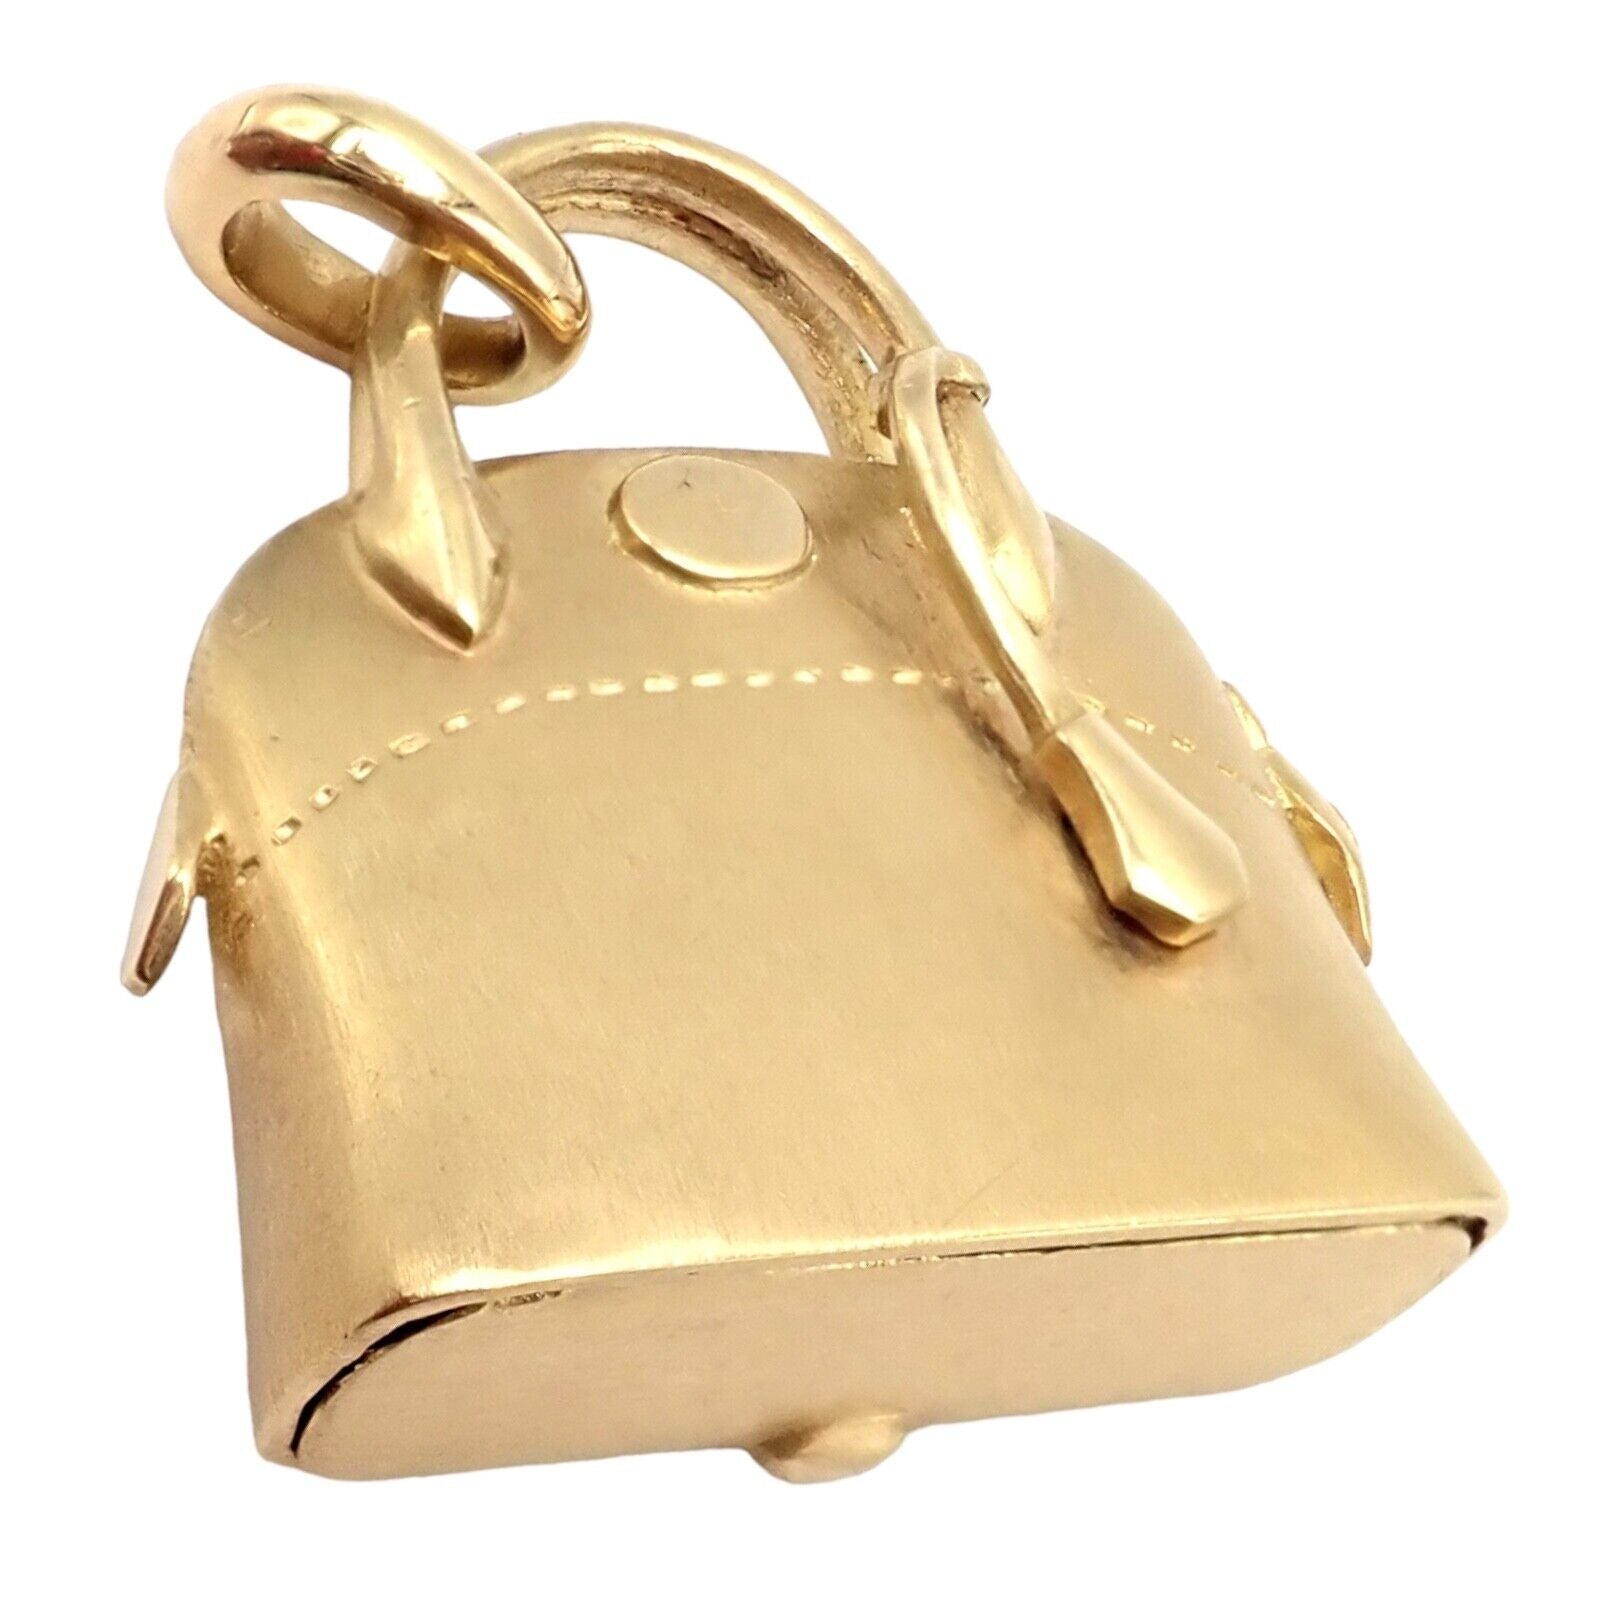 Rare! Authentic Hermes Bolide 18K Yellow Gold Bag Purse Large Charm Pendant